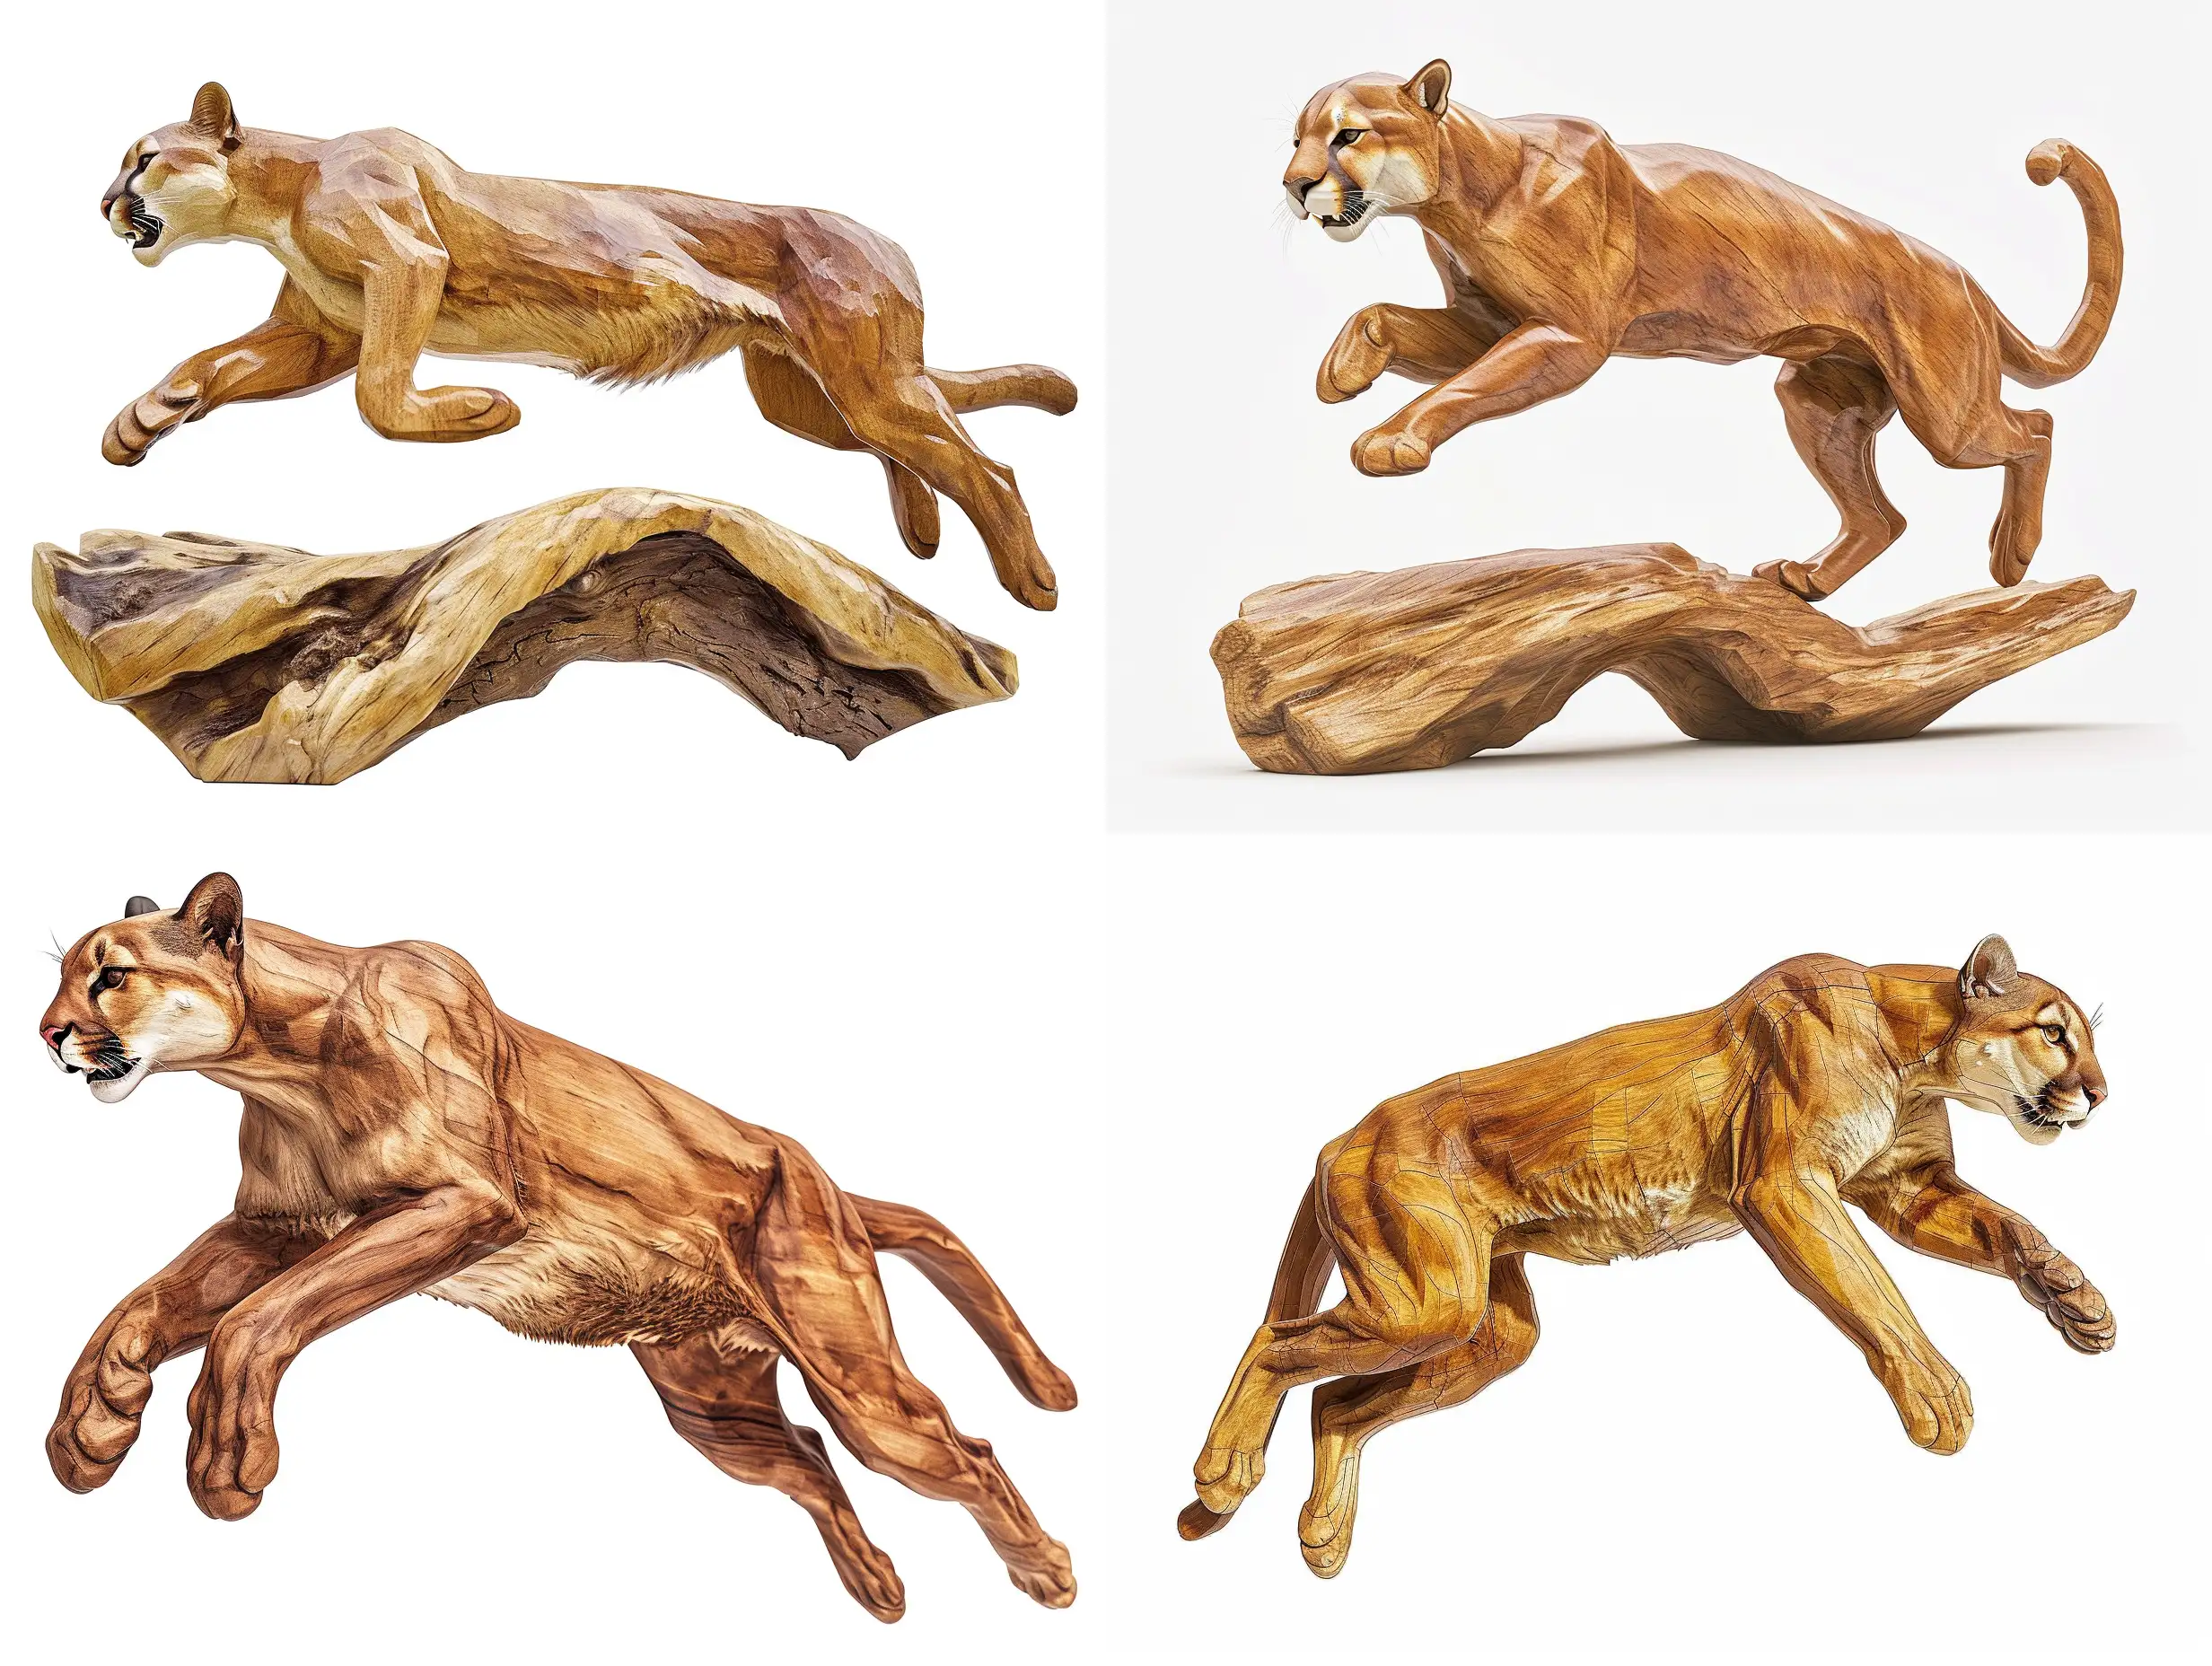 Realistic-Wooden-Sculpture-of-Puma-Concolor-Jumping-in-8K-Render